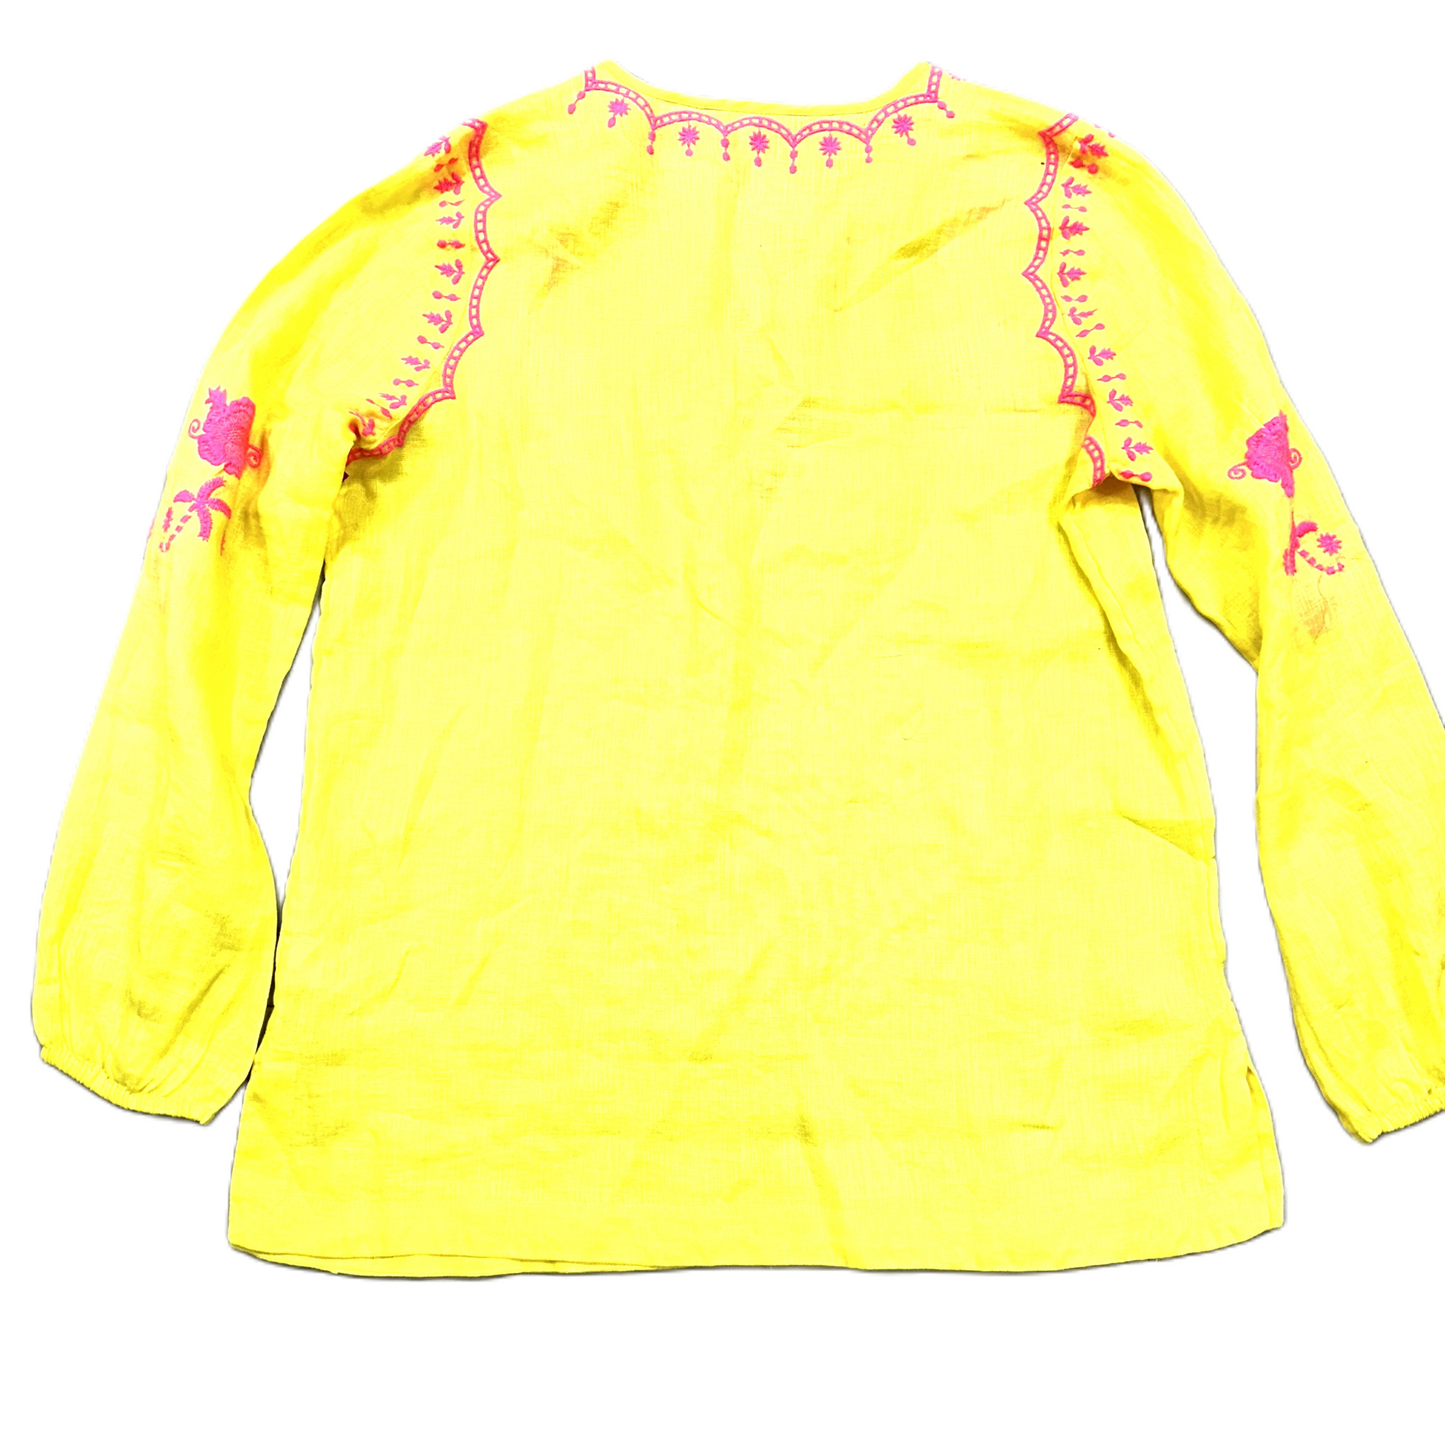 Pink & Yellow Top Long Sleeve Designer By Lilly Pulitzer, Size: S